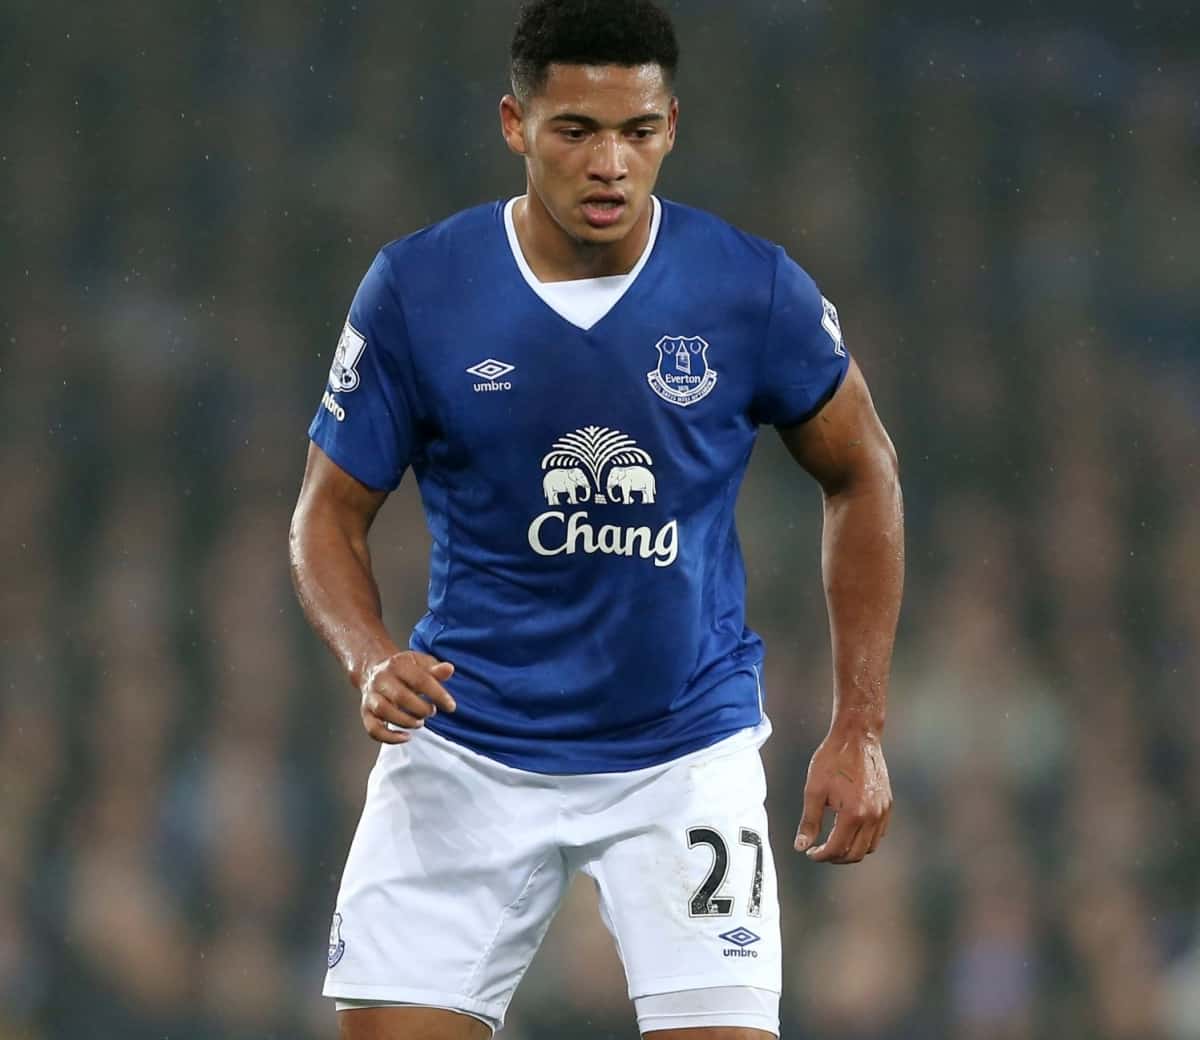 Everton v Norwich City - Capital One Cup Fourth Round - Goodison Park - 15/16 - 27/10/15 Everton's Tyias Browning Mandatory Credit: Action Images / Matthew Childs